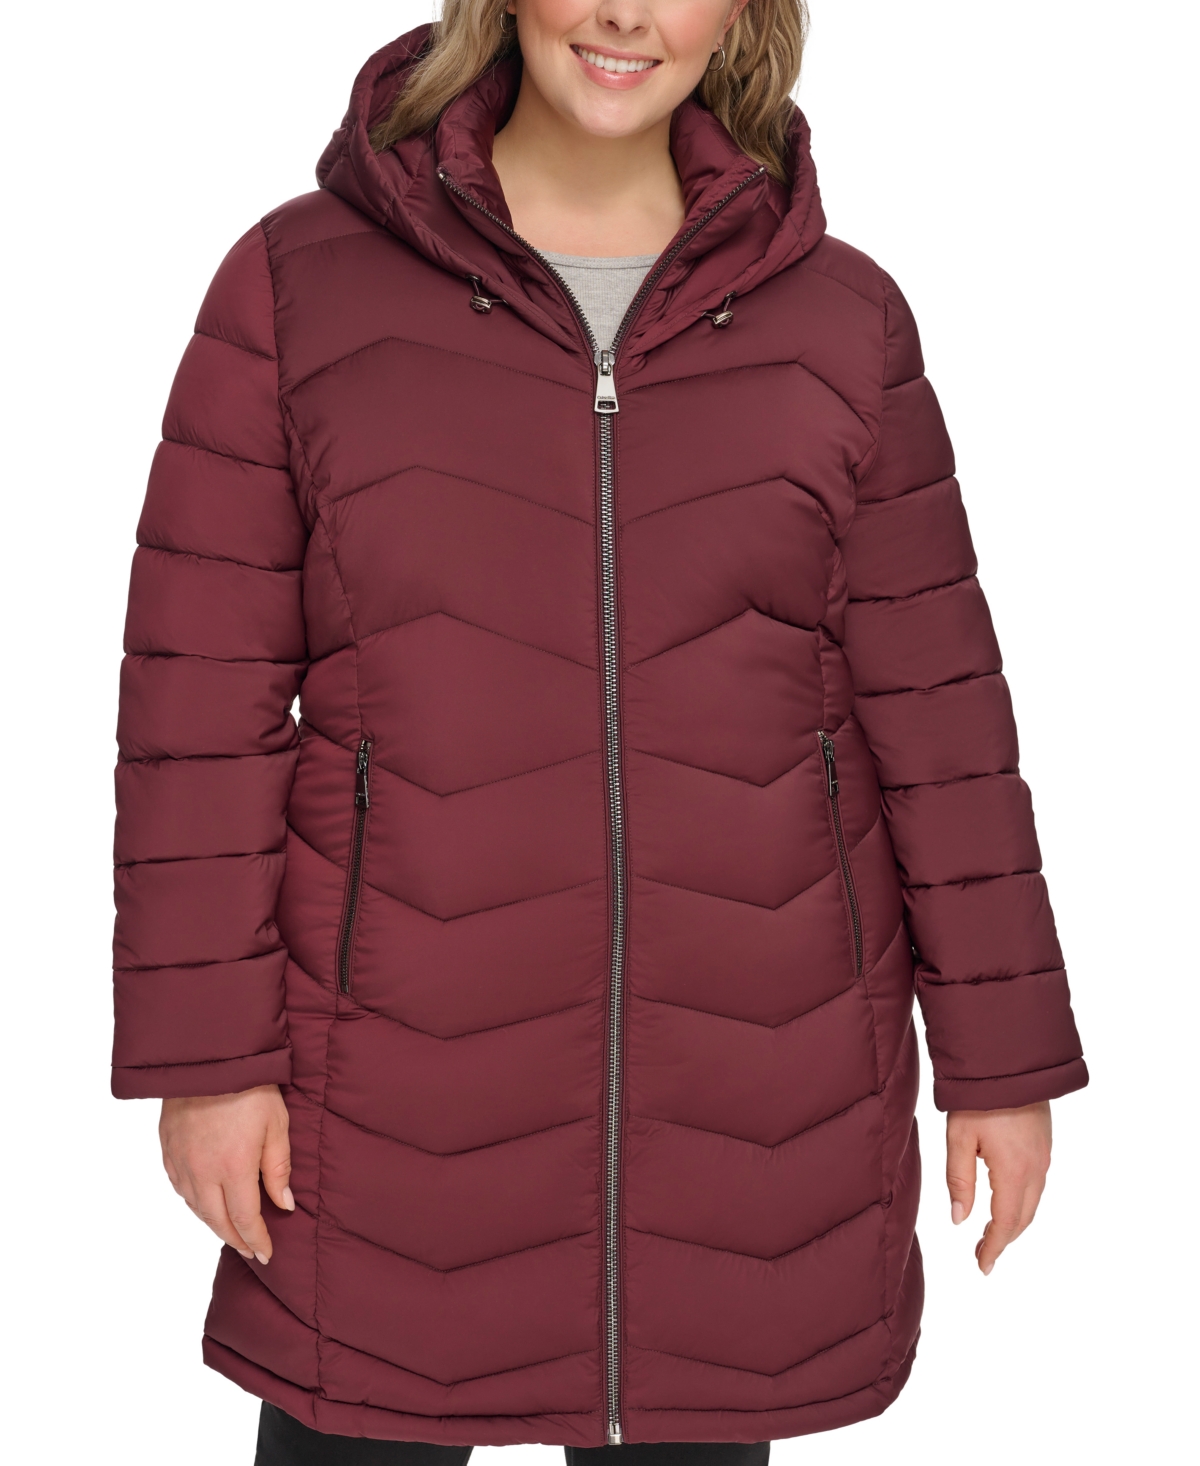 CALVIN KLEIN WOMEN'S PLUS SIZE HOODED PACKABLE PUFFER COAT, CREATED FOR MACY'S